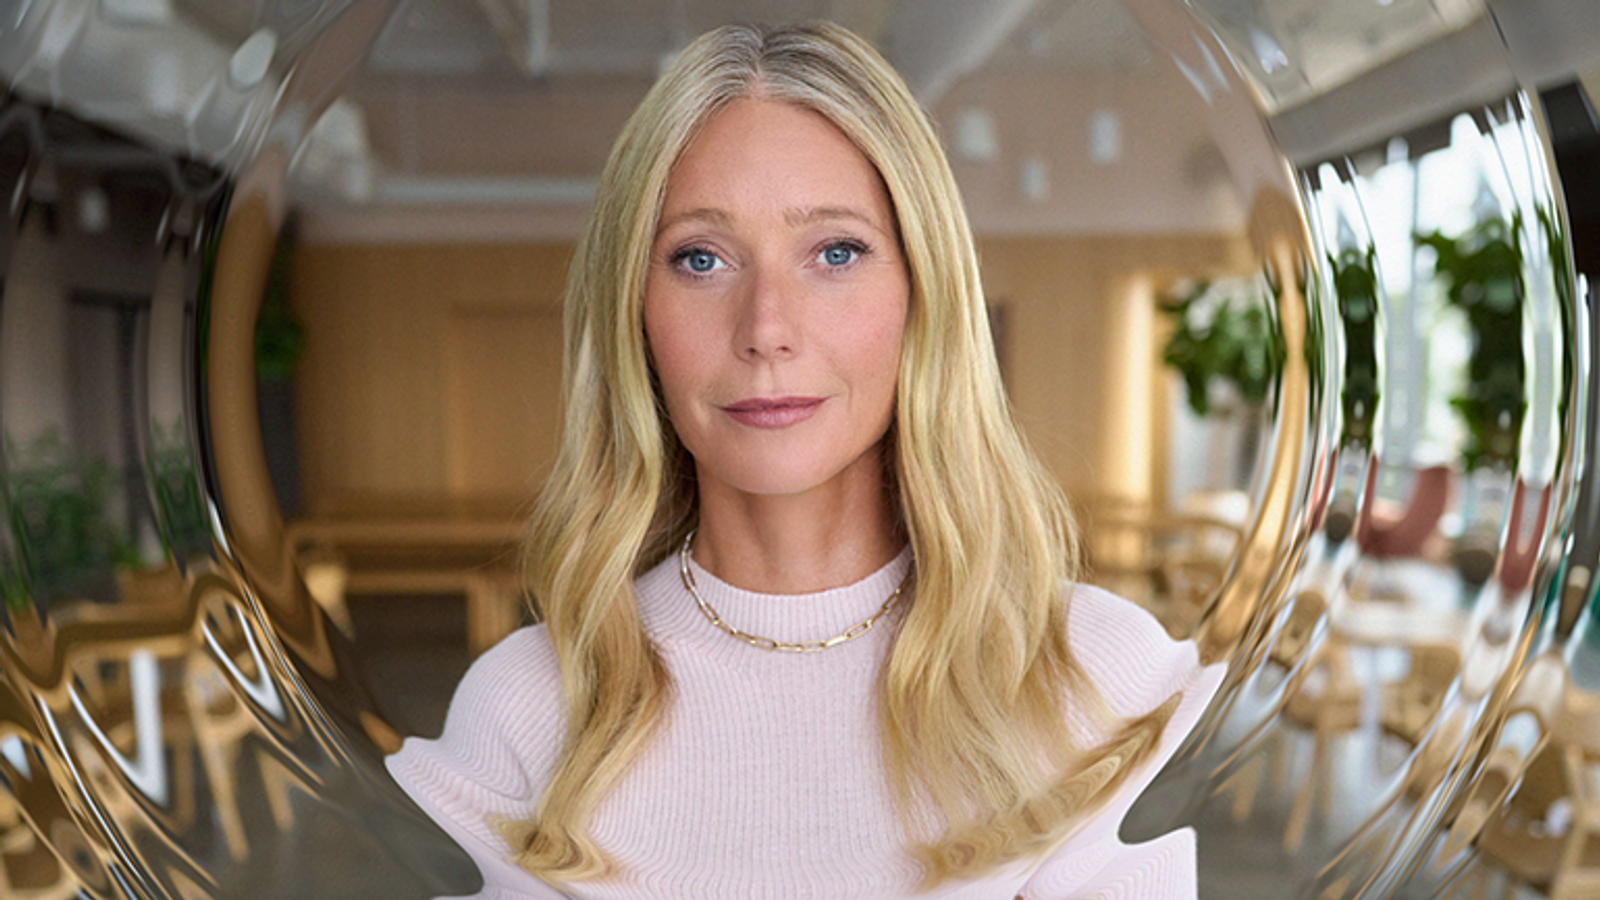 Gwyneth Paltrow on wellness, celebrity menopause criticism, and the famous vagina candle: 'My instincts were right'